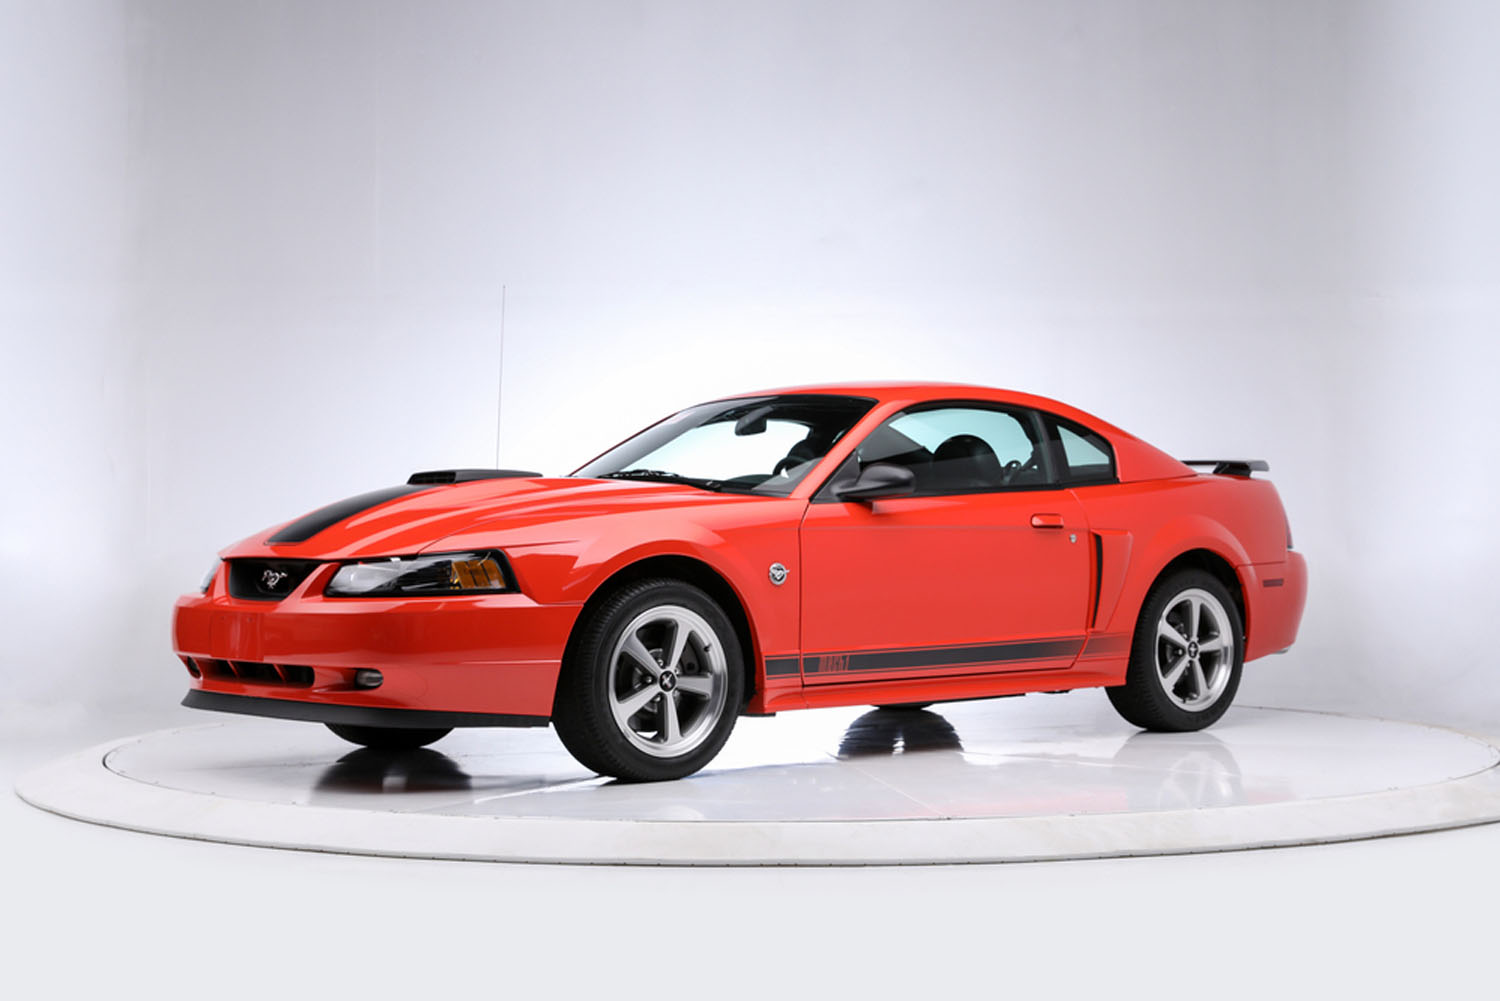 Is the 2004 Mach 1 rare?